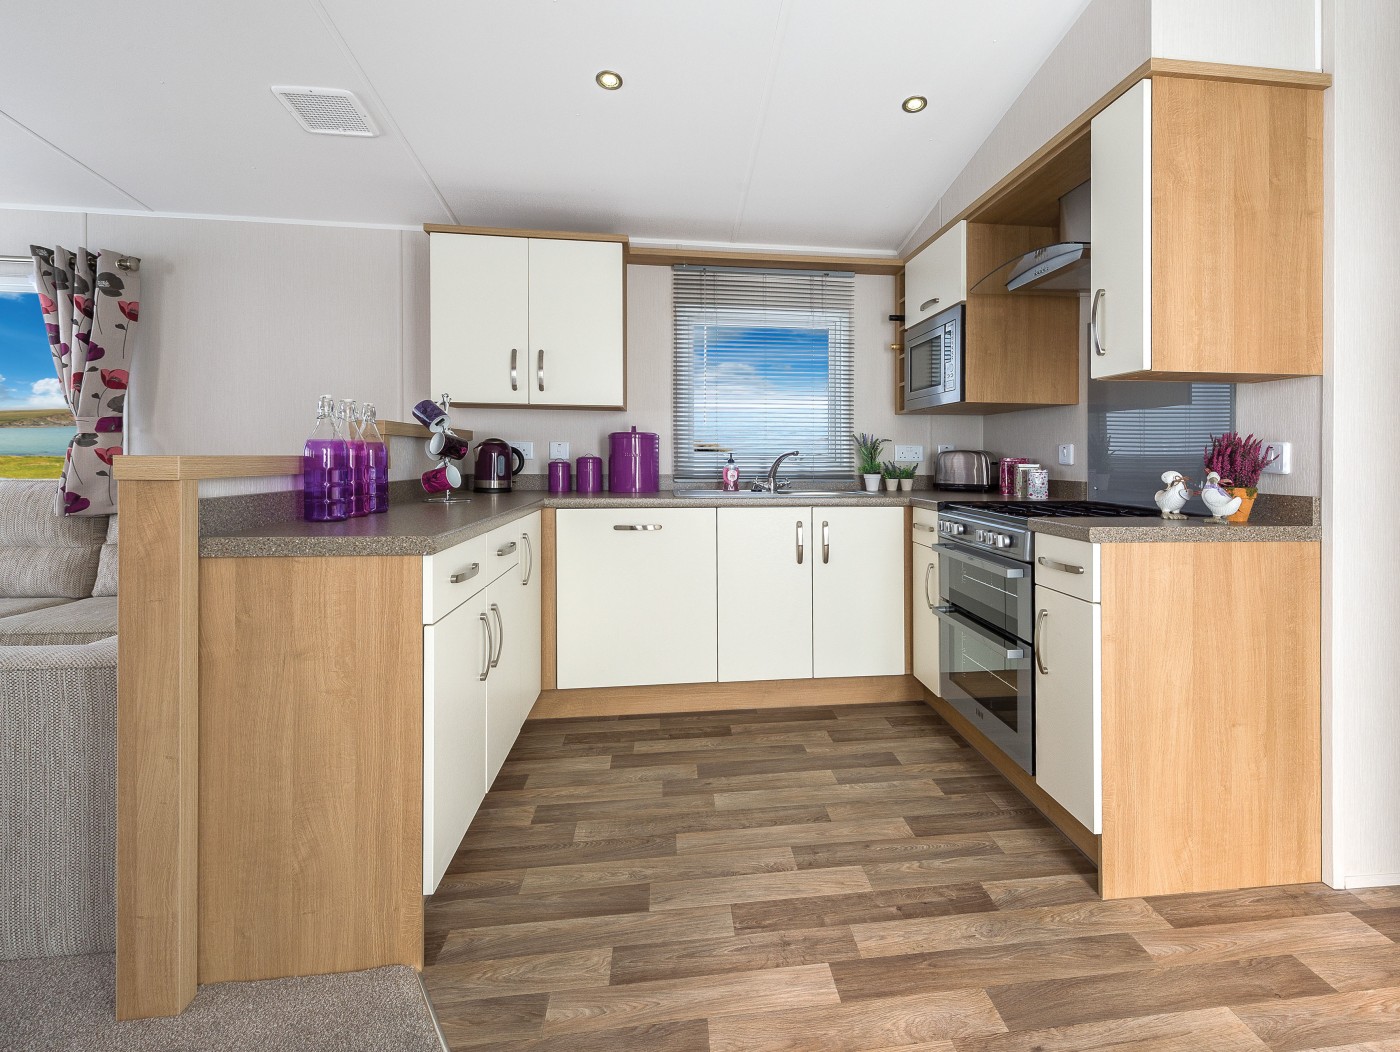 You will have a fantastic view of Ben Y Vrackie from the Willerby Avonmore. It has two bedrooms and an open plan kitchen/living room layout. 
Bedroom 1 – Double
Bedroom 2 – Twin. 
The living area can accommodate a further two people by setting up the sofa bed.